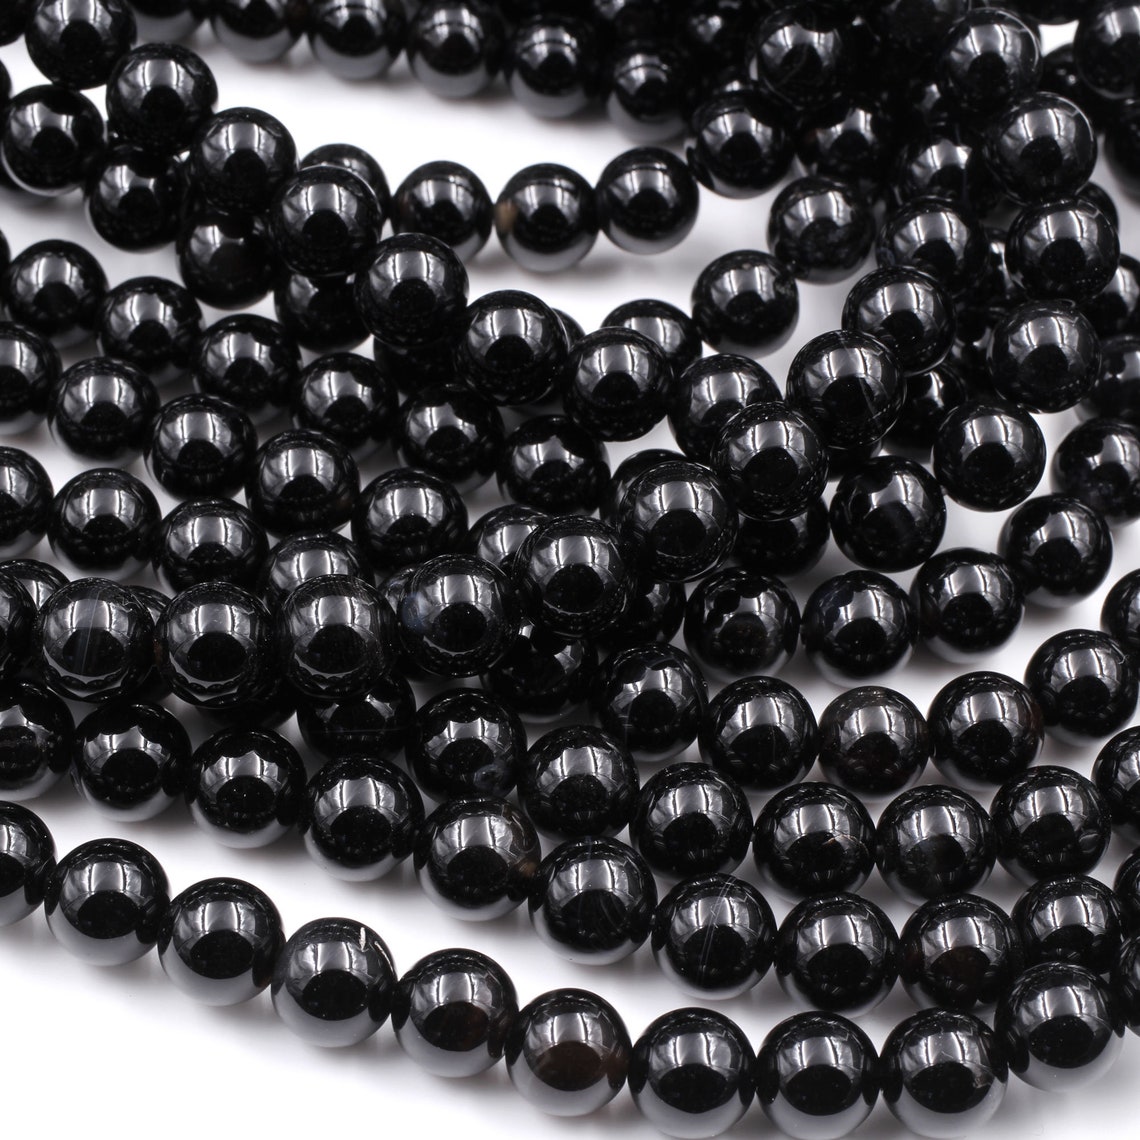 AAA Grade Natural Black Onyx Round Beads 2mm 3mm 4mm 6mm 8mm | Etsy